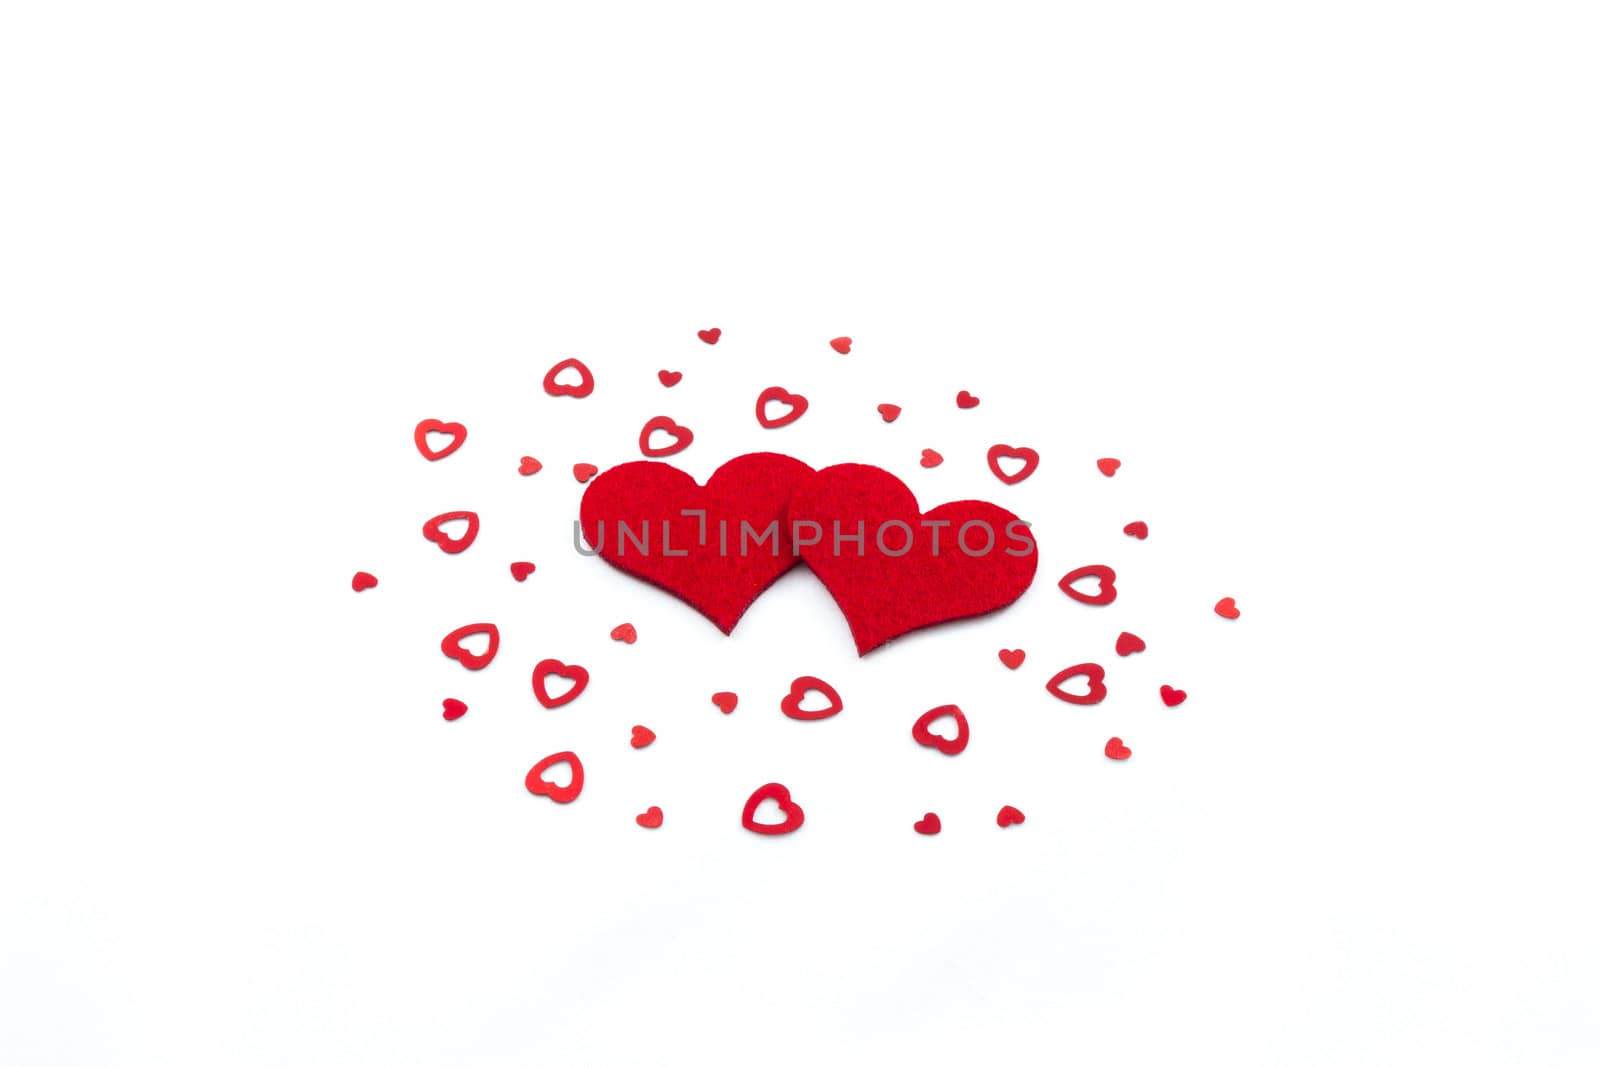 Big and small heart decorations on white background